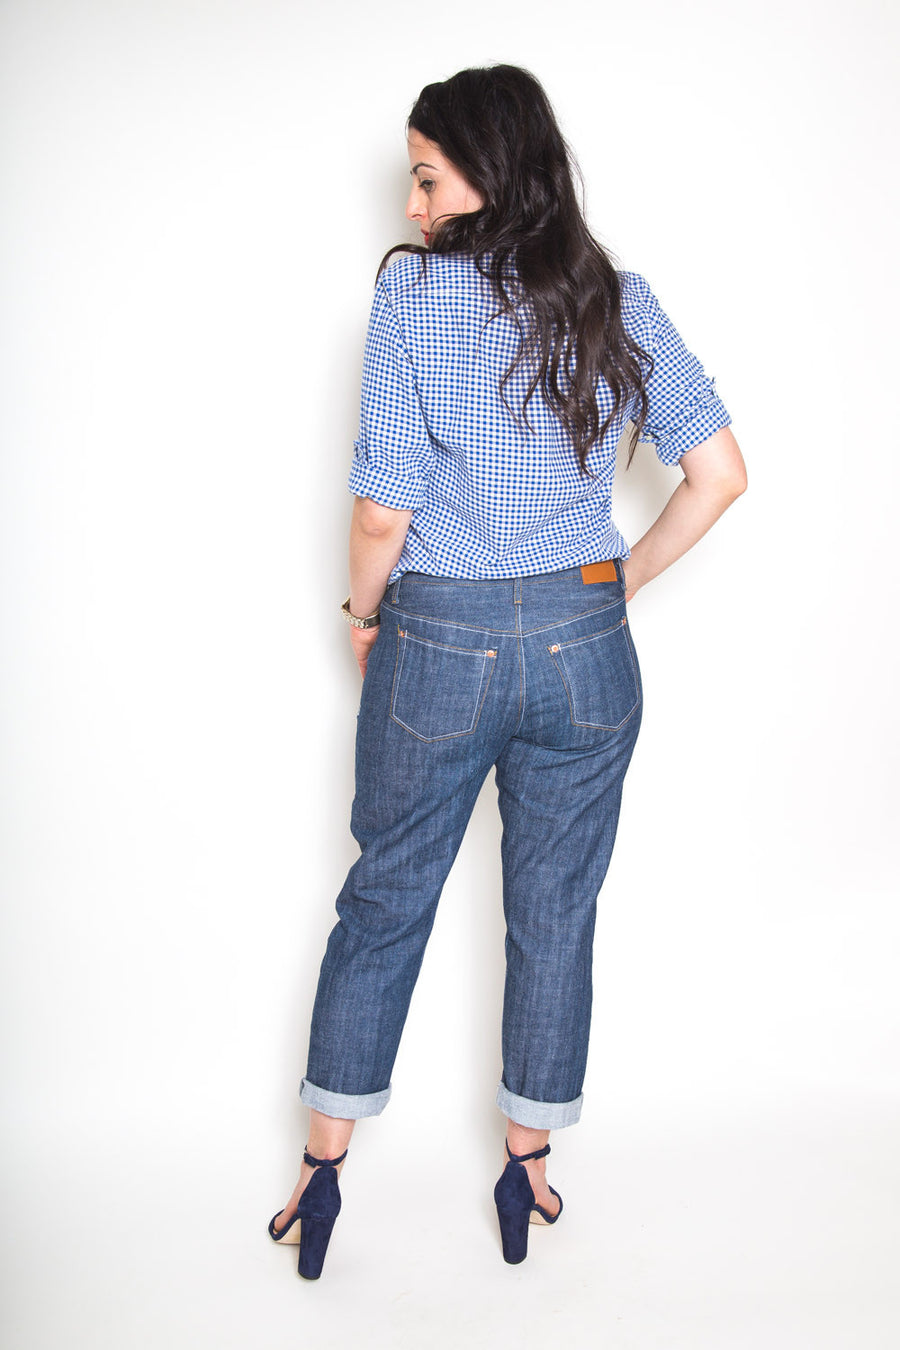 Button Fly Jeans-Making Kit – Closet Core Patterns